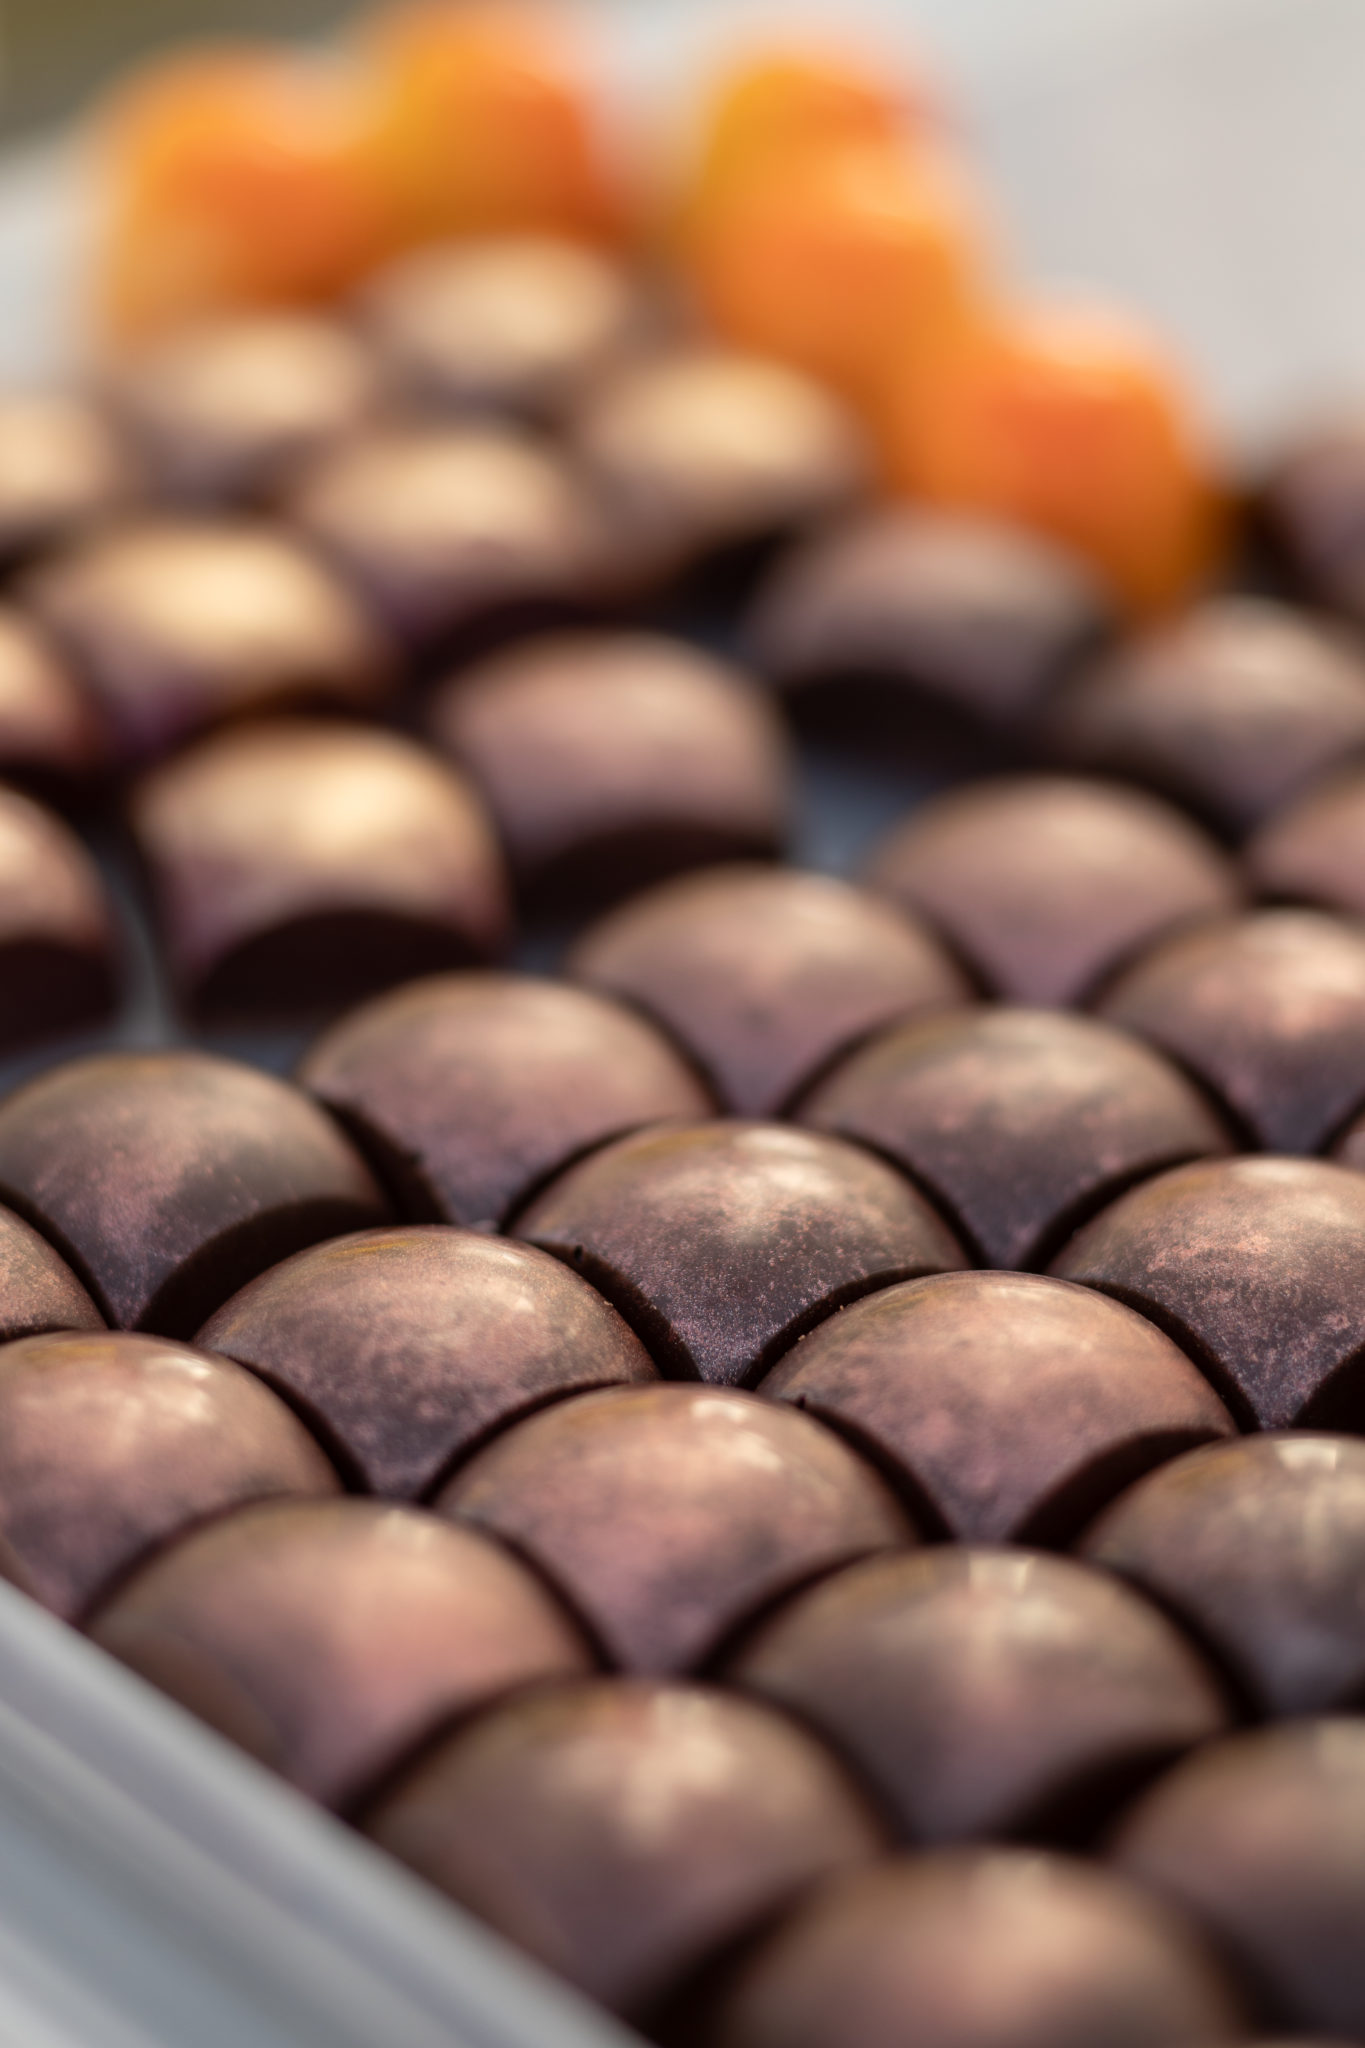 A tray of finished chocolates ready for packaging. (Chris Hardy / Sonoma Magazine)